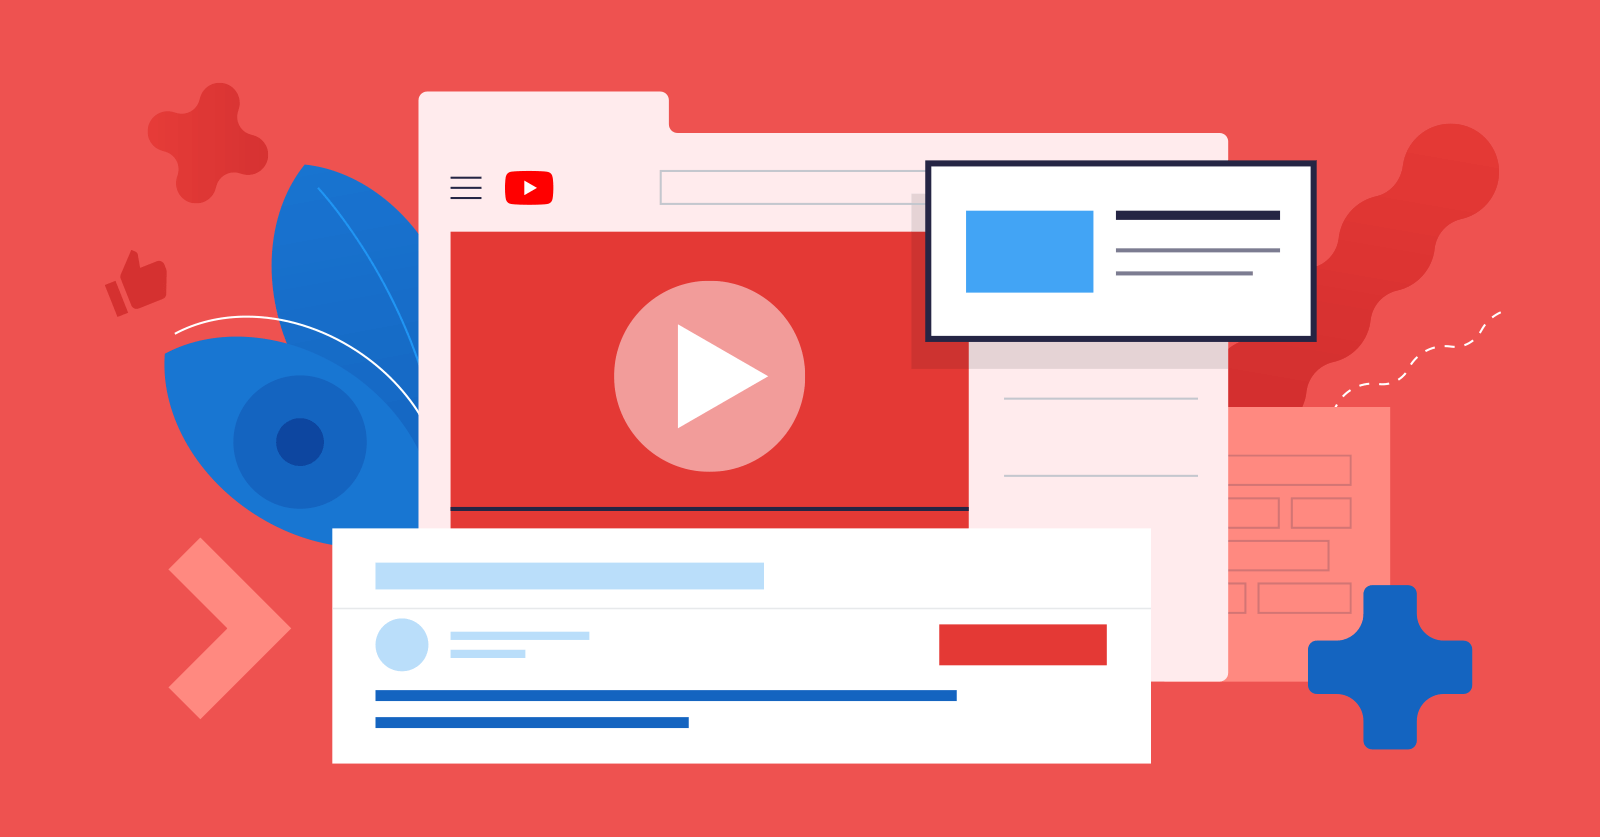 YouTube SEO: How to boost video visibility and grow your channel (free checklist)